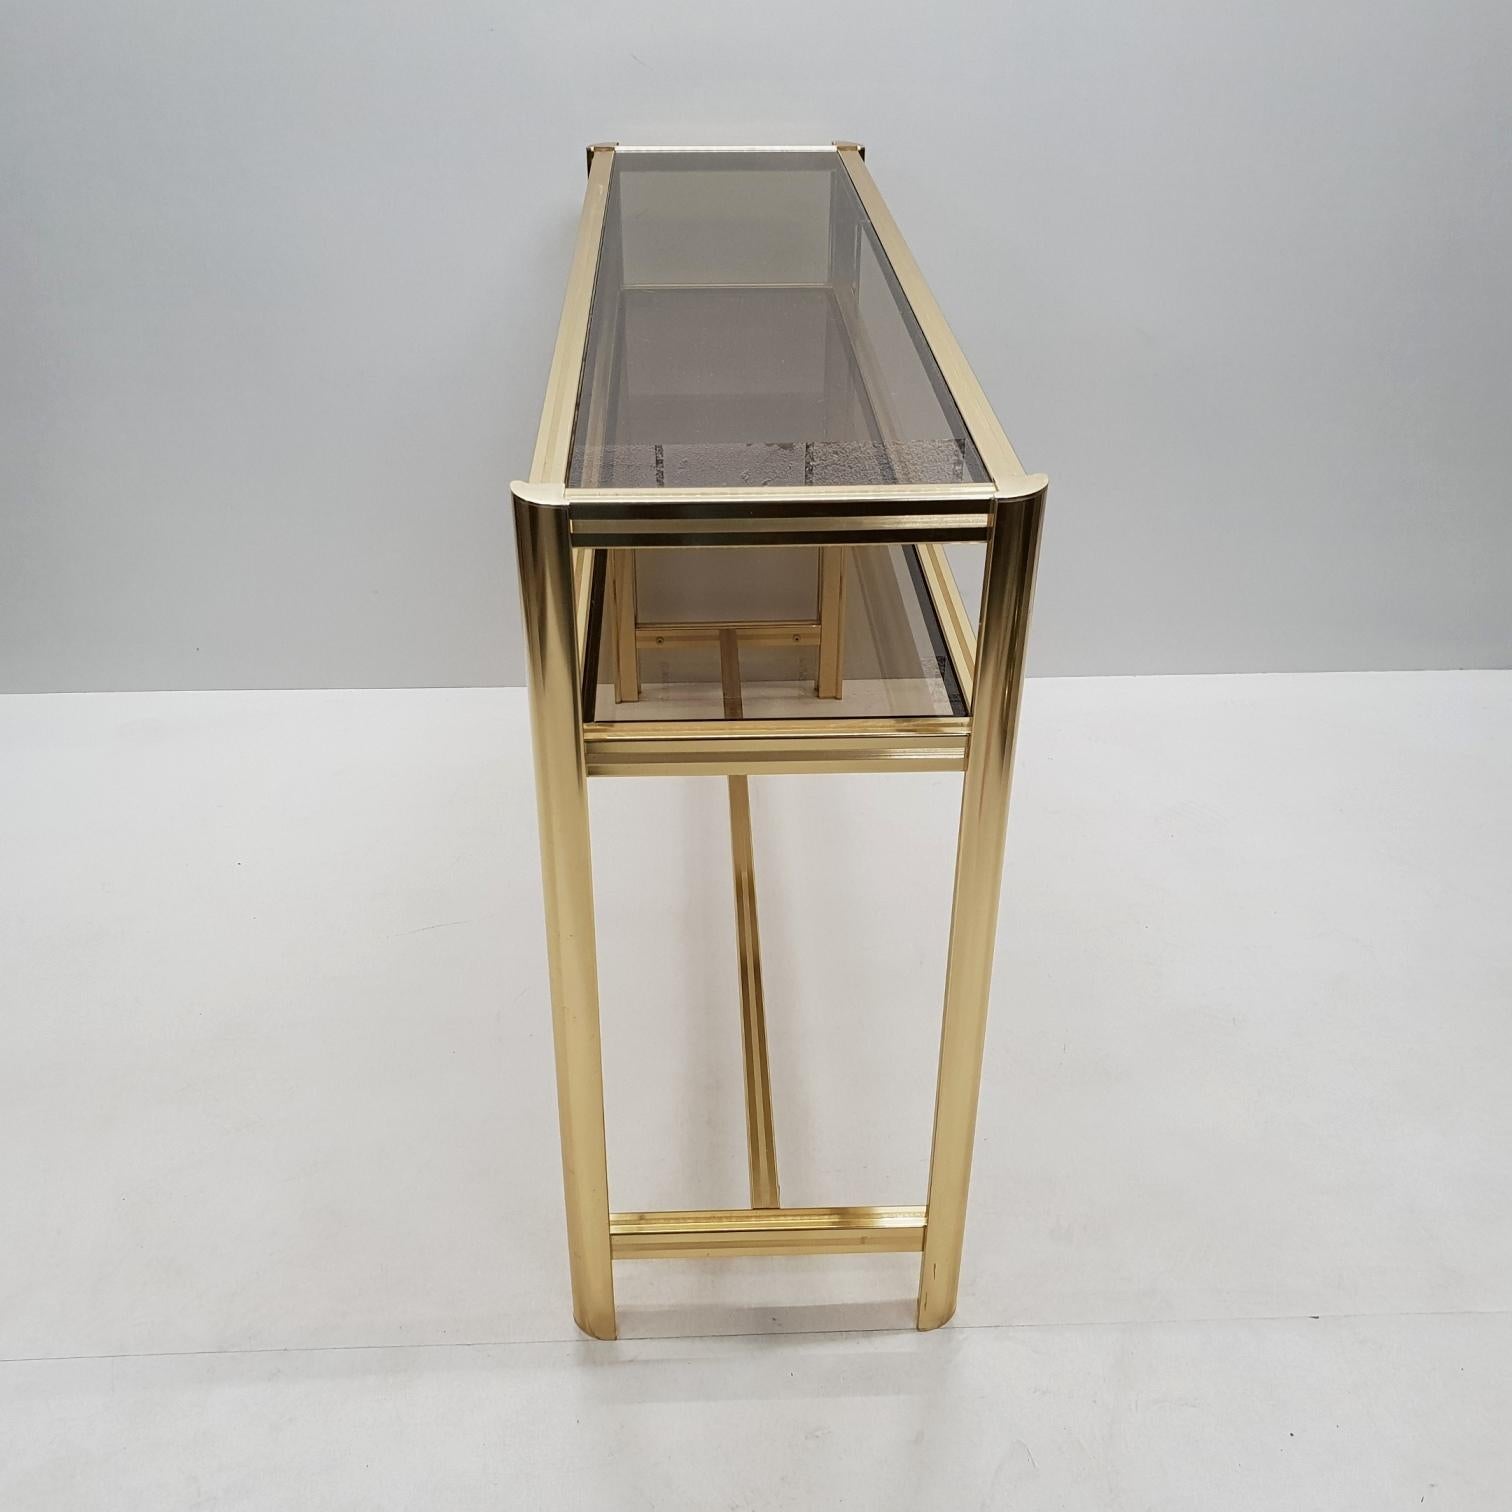 Italian Modern Gilt Brass Two Tiers Side Table with Smoked Glass, 1980s For Sale 1